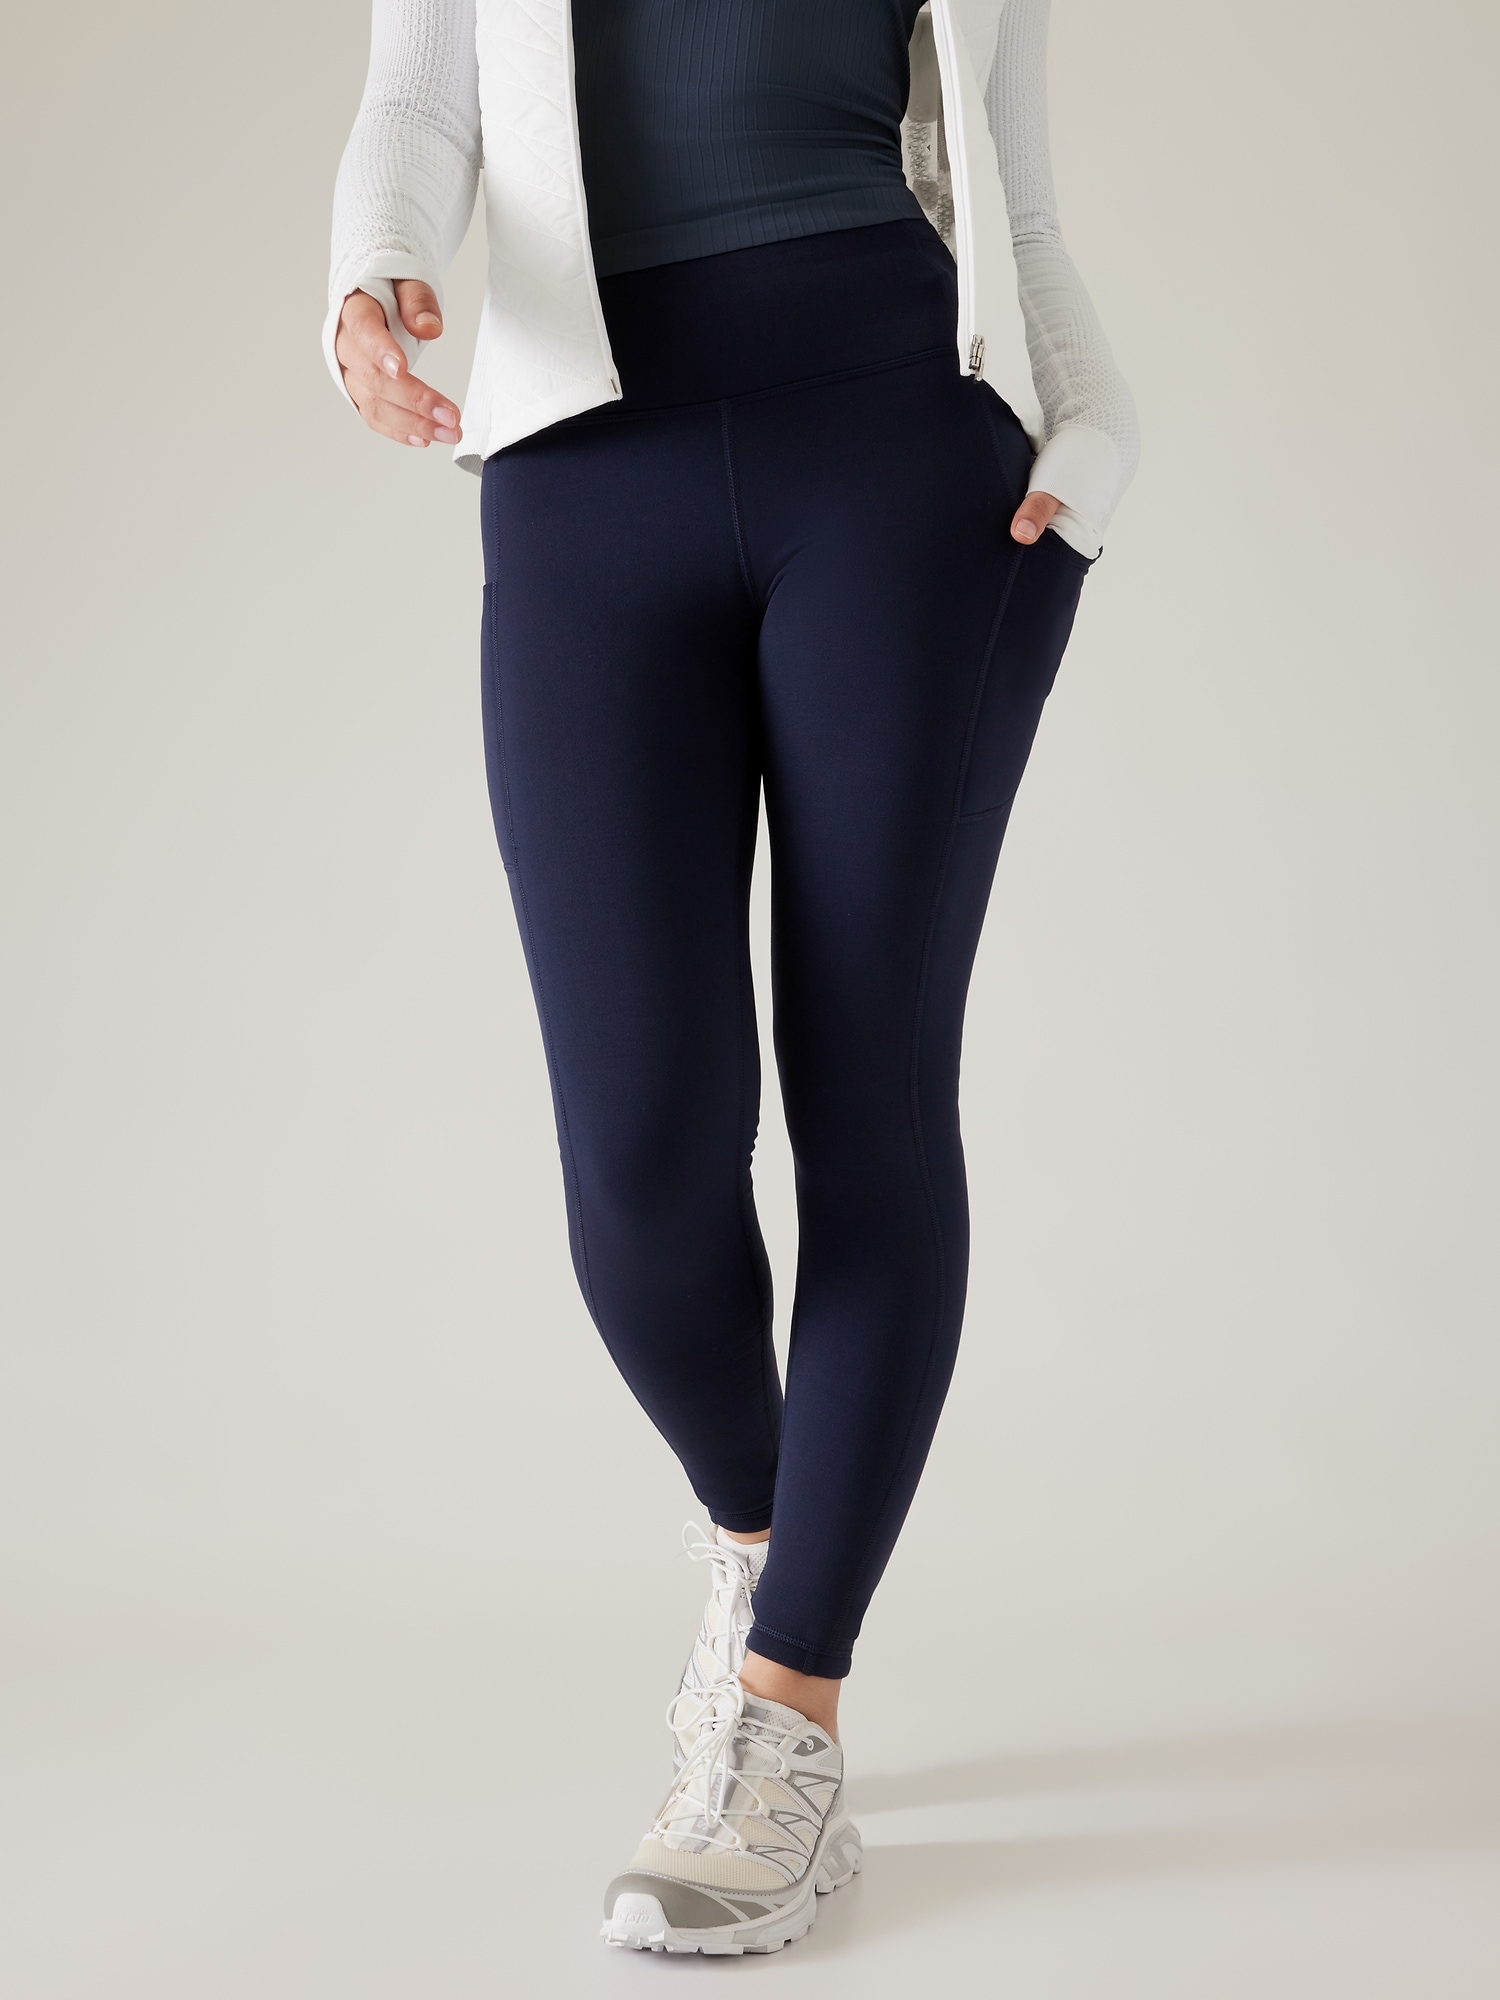 Leggings with Pockets